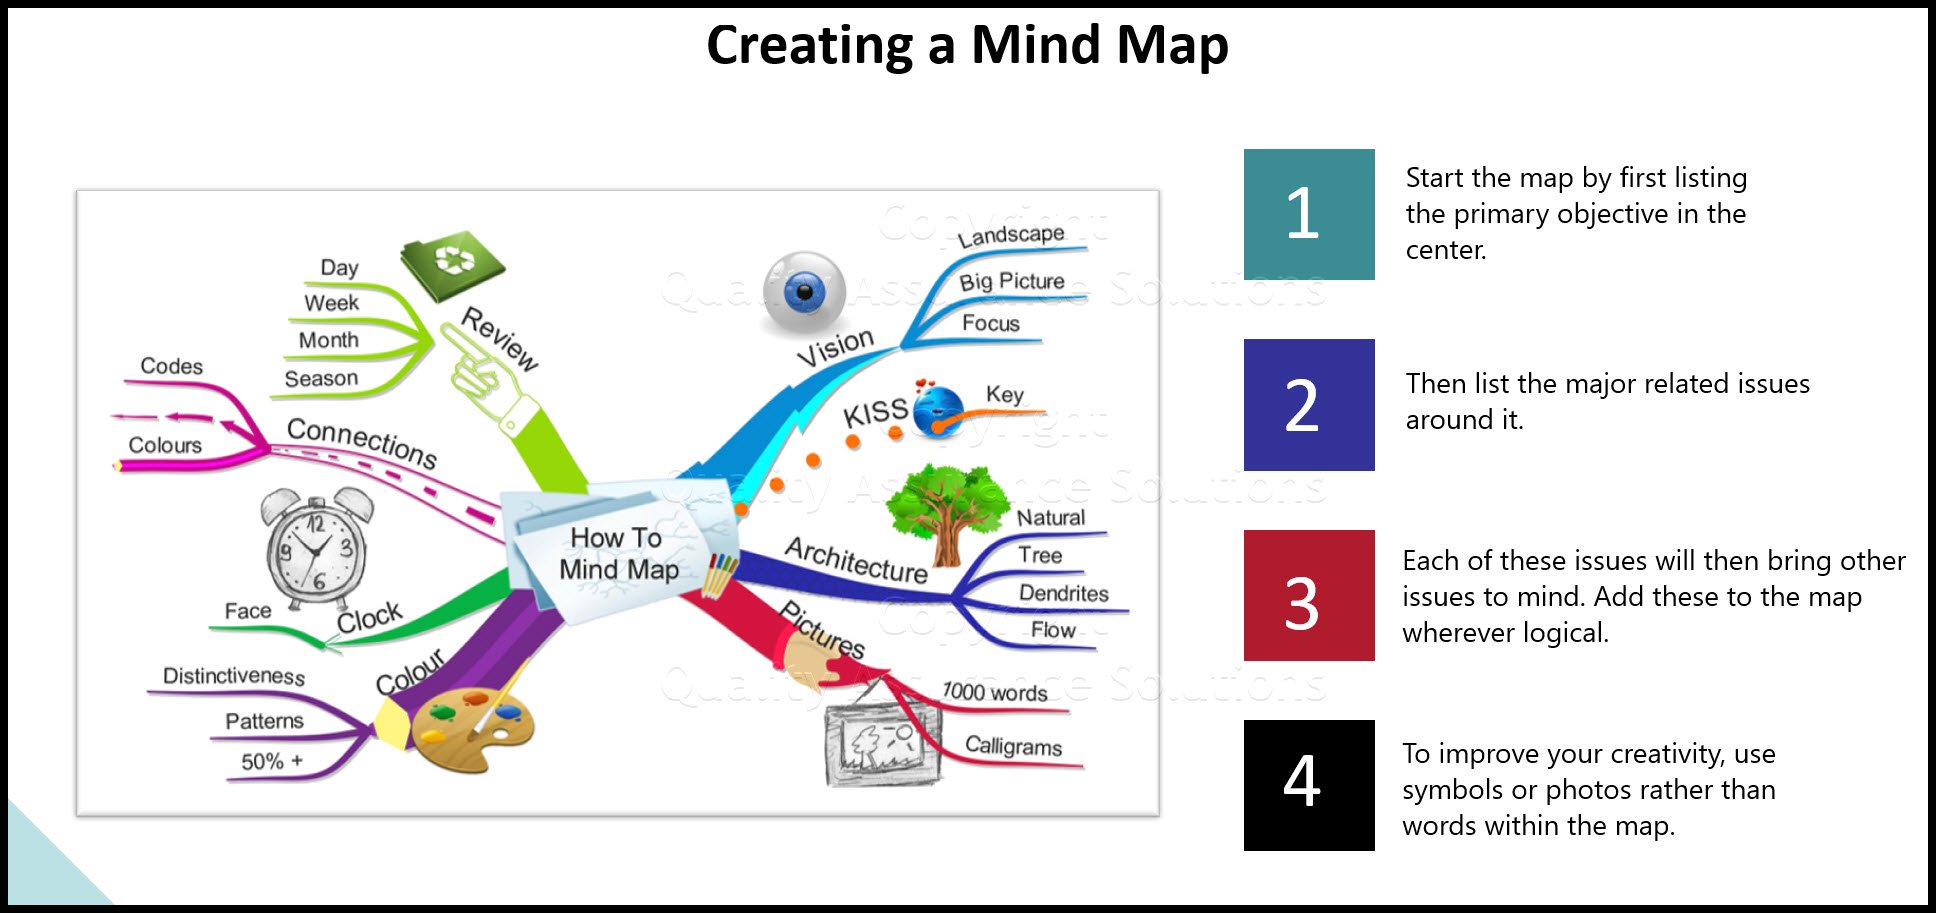 Learn the brainstorming mind mapping technique. We provide an example of it in action. 